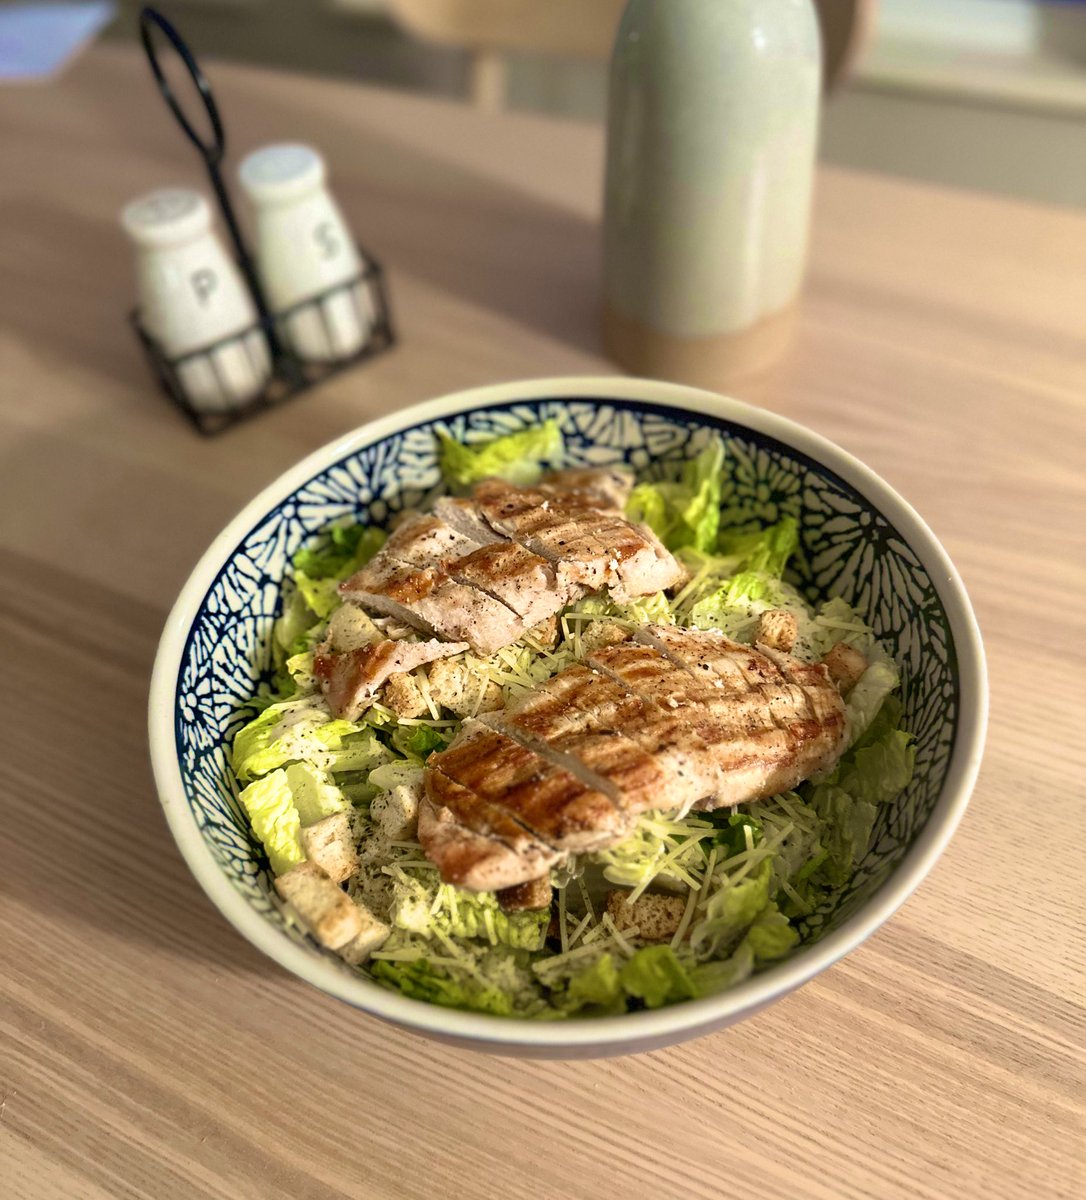 My ⭐️ fav #ChickenCaesarSalad🥗🍗 for @ACG_EBGI’s 4️⃣5️⃣ Healthy Meals Challenge!

In #residency most of us are always on the 🏃‍♀️

Marinate chicken breasts with #oliveoil, 🍋, 🧂& black pepper in Ziploc ➡️ panini press x 15 mins. Et Voilà!

#EatGoodFeelGoodxCRCAwareness #EBGIxCRC